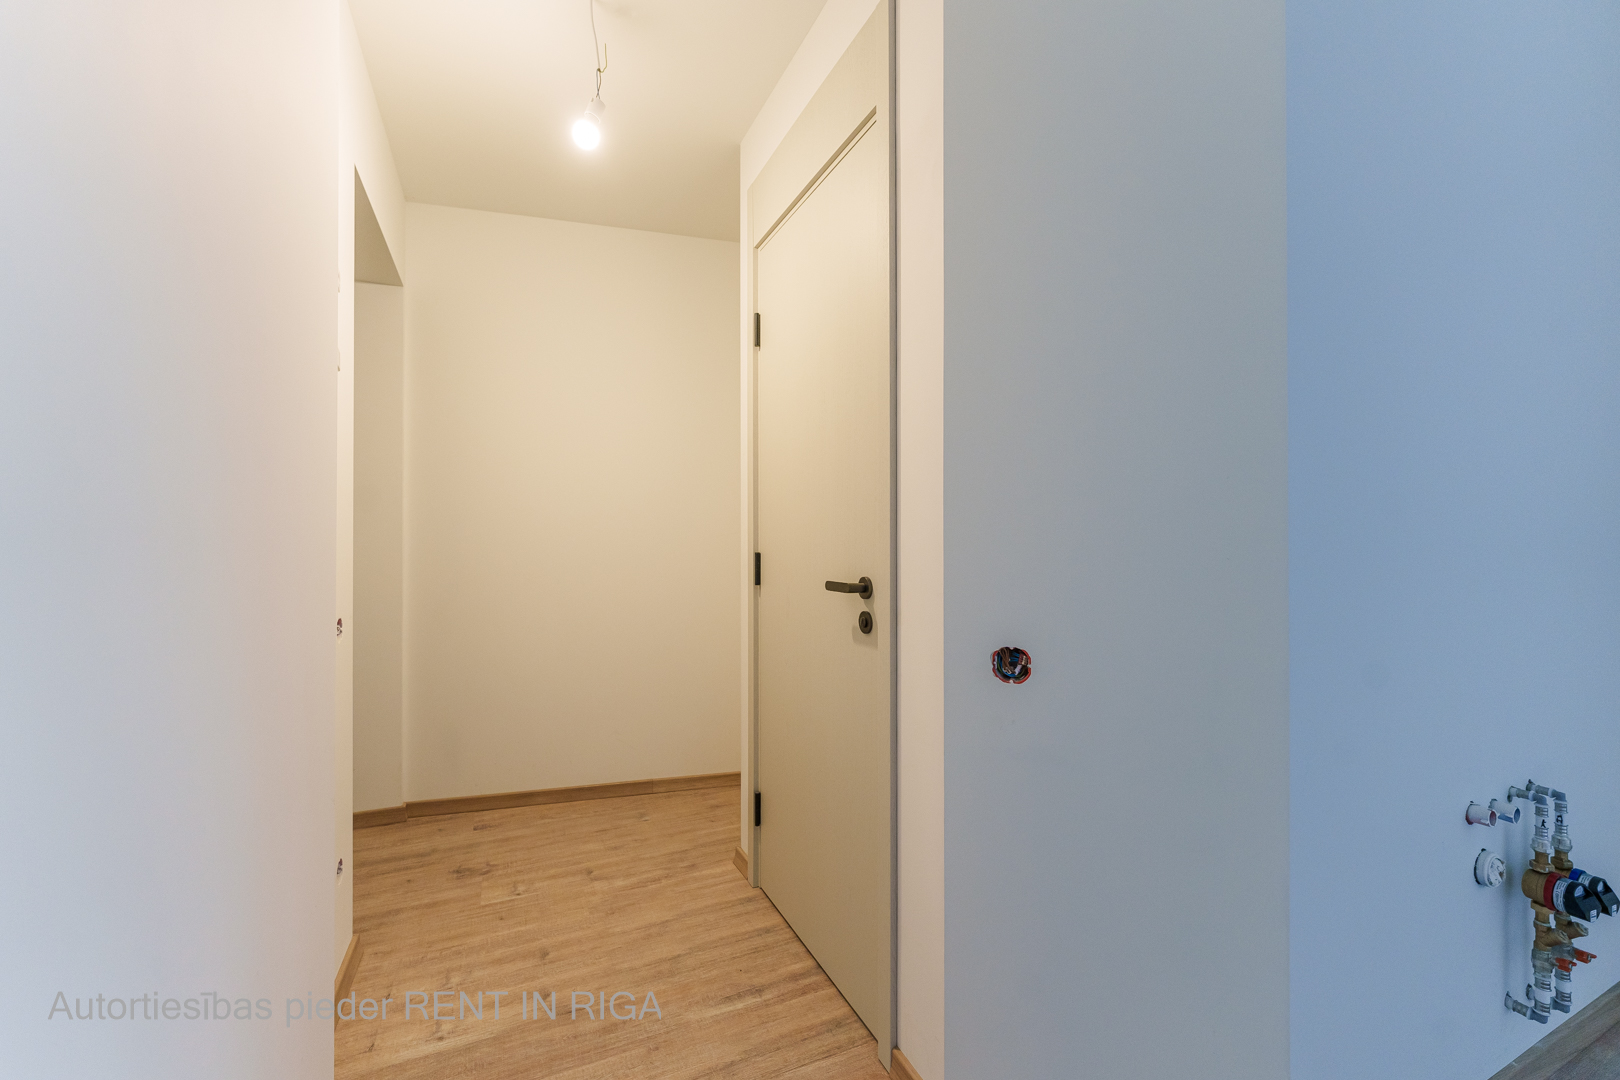 Apartment for sale, Jersikas street 21a - Image 1